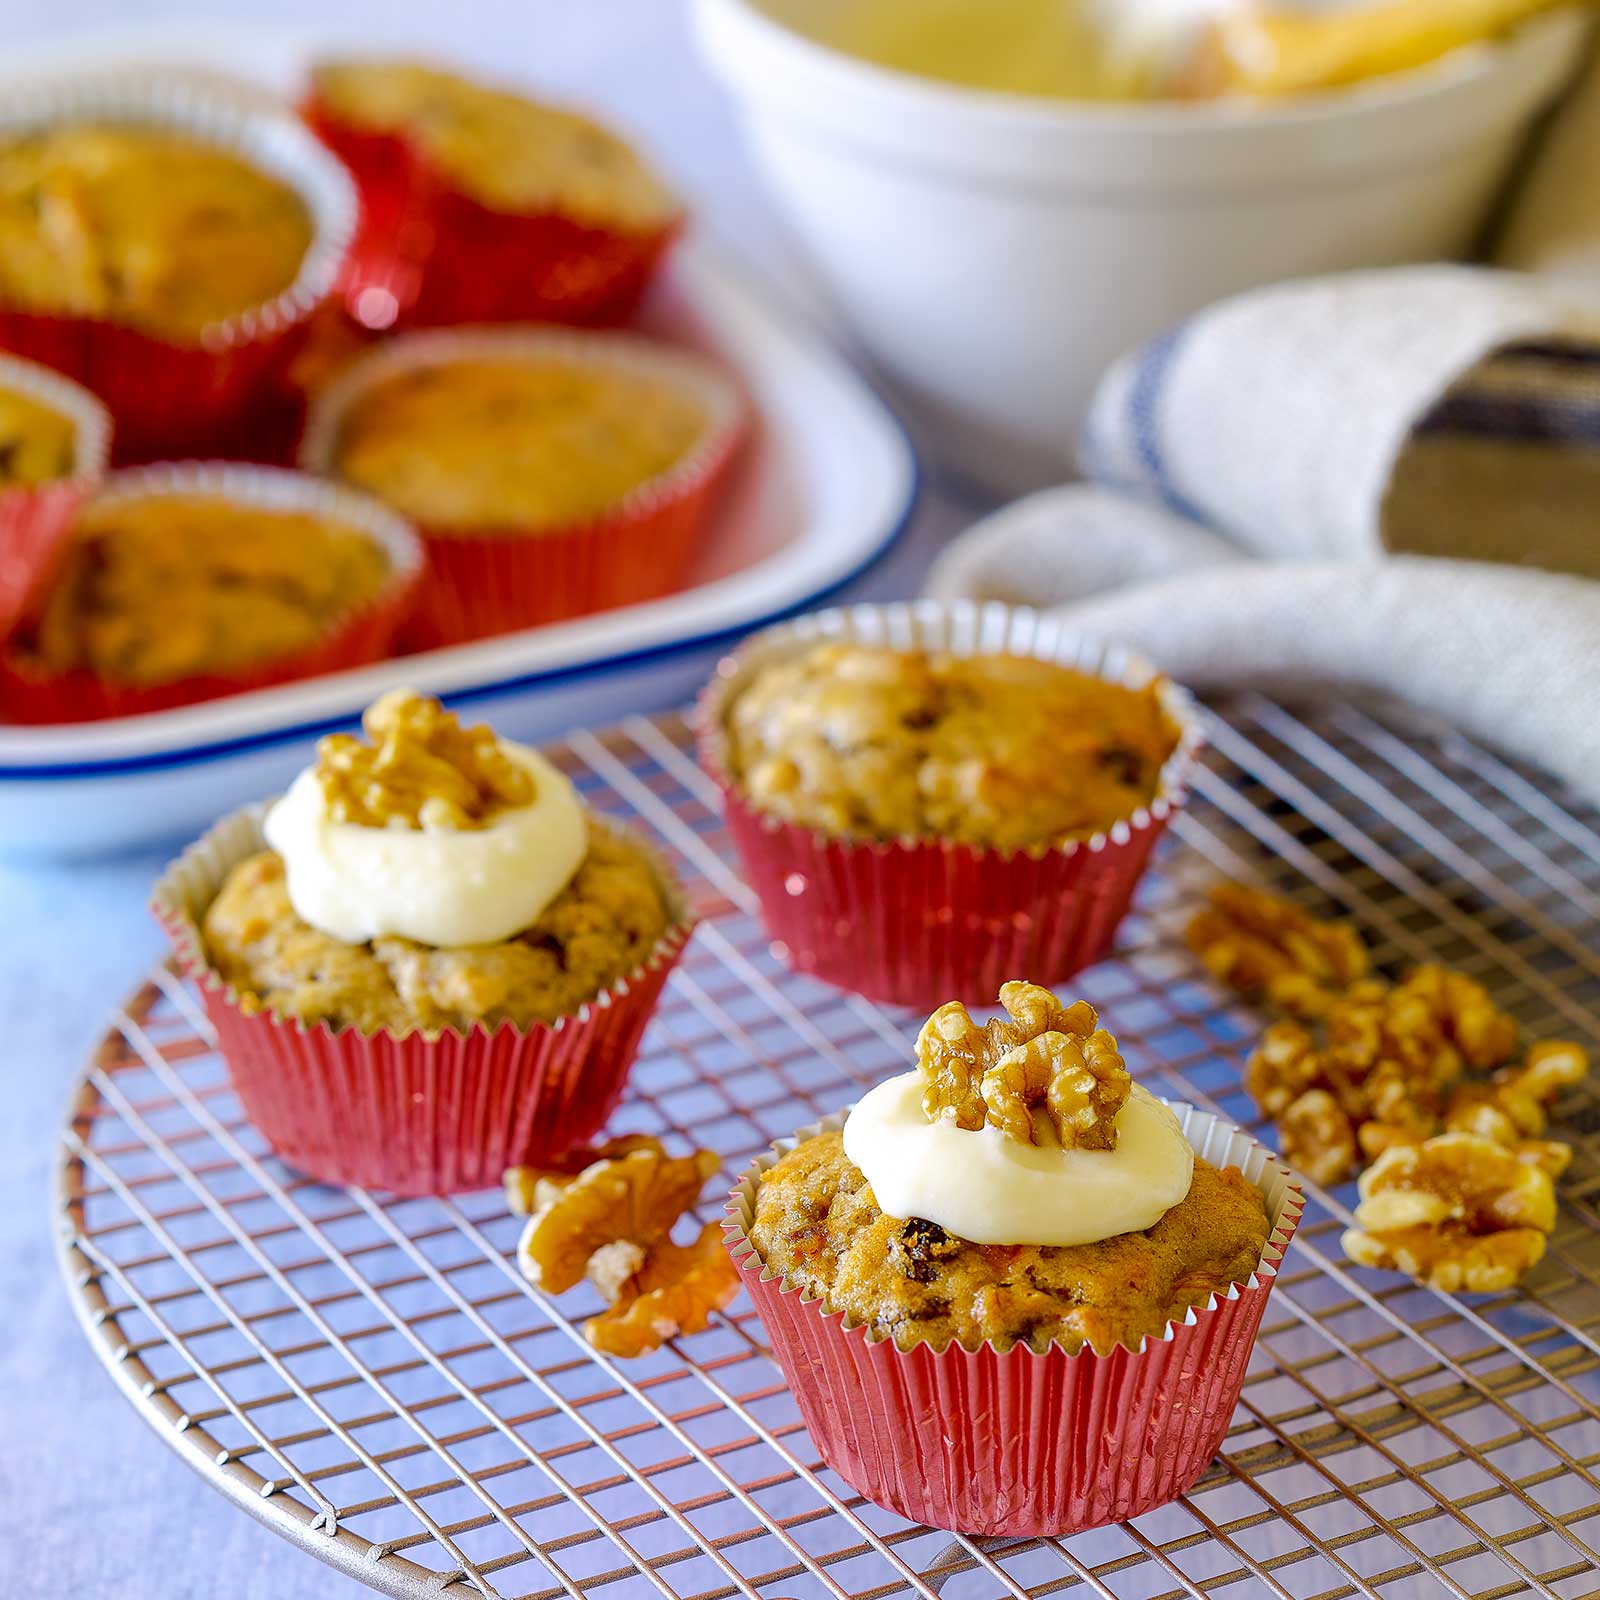 Three egg-free banana walnut muffins sit on a wire cooling rack. Two are iced with cream-cheese frosting and walnut pieces. At the back an enamel dish is full of muffins waiting to be iced.